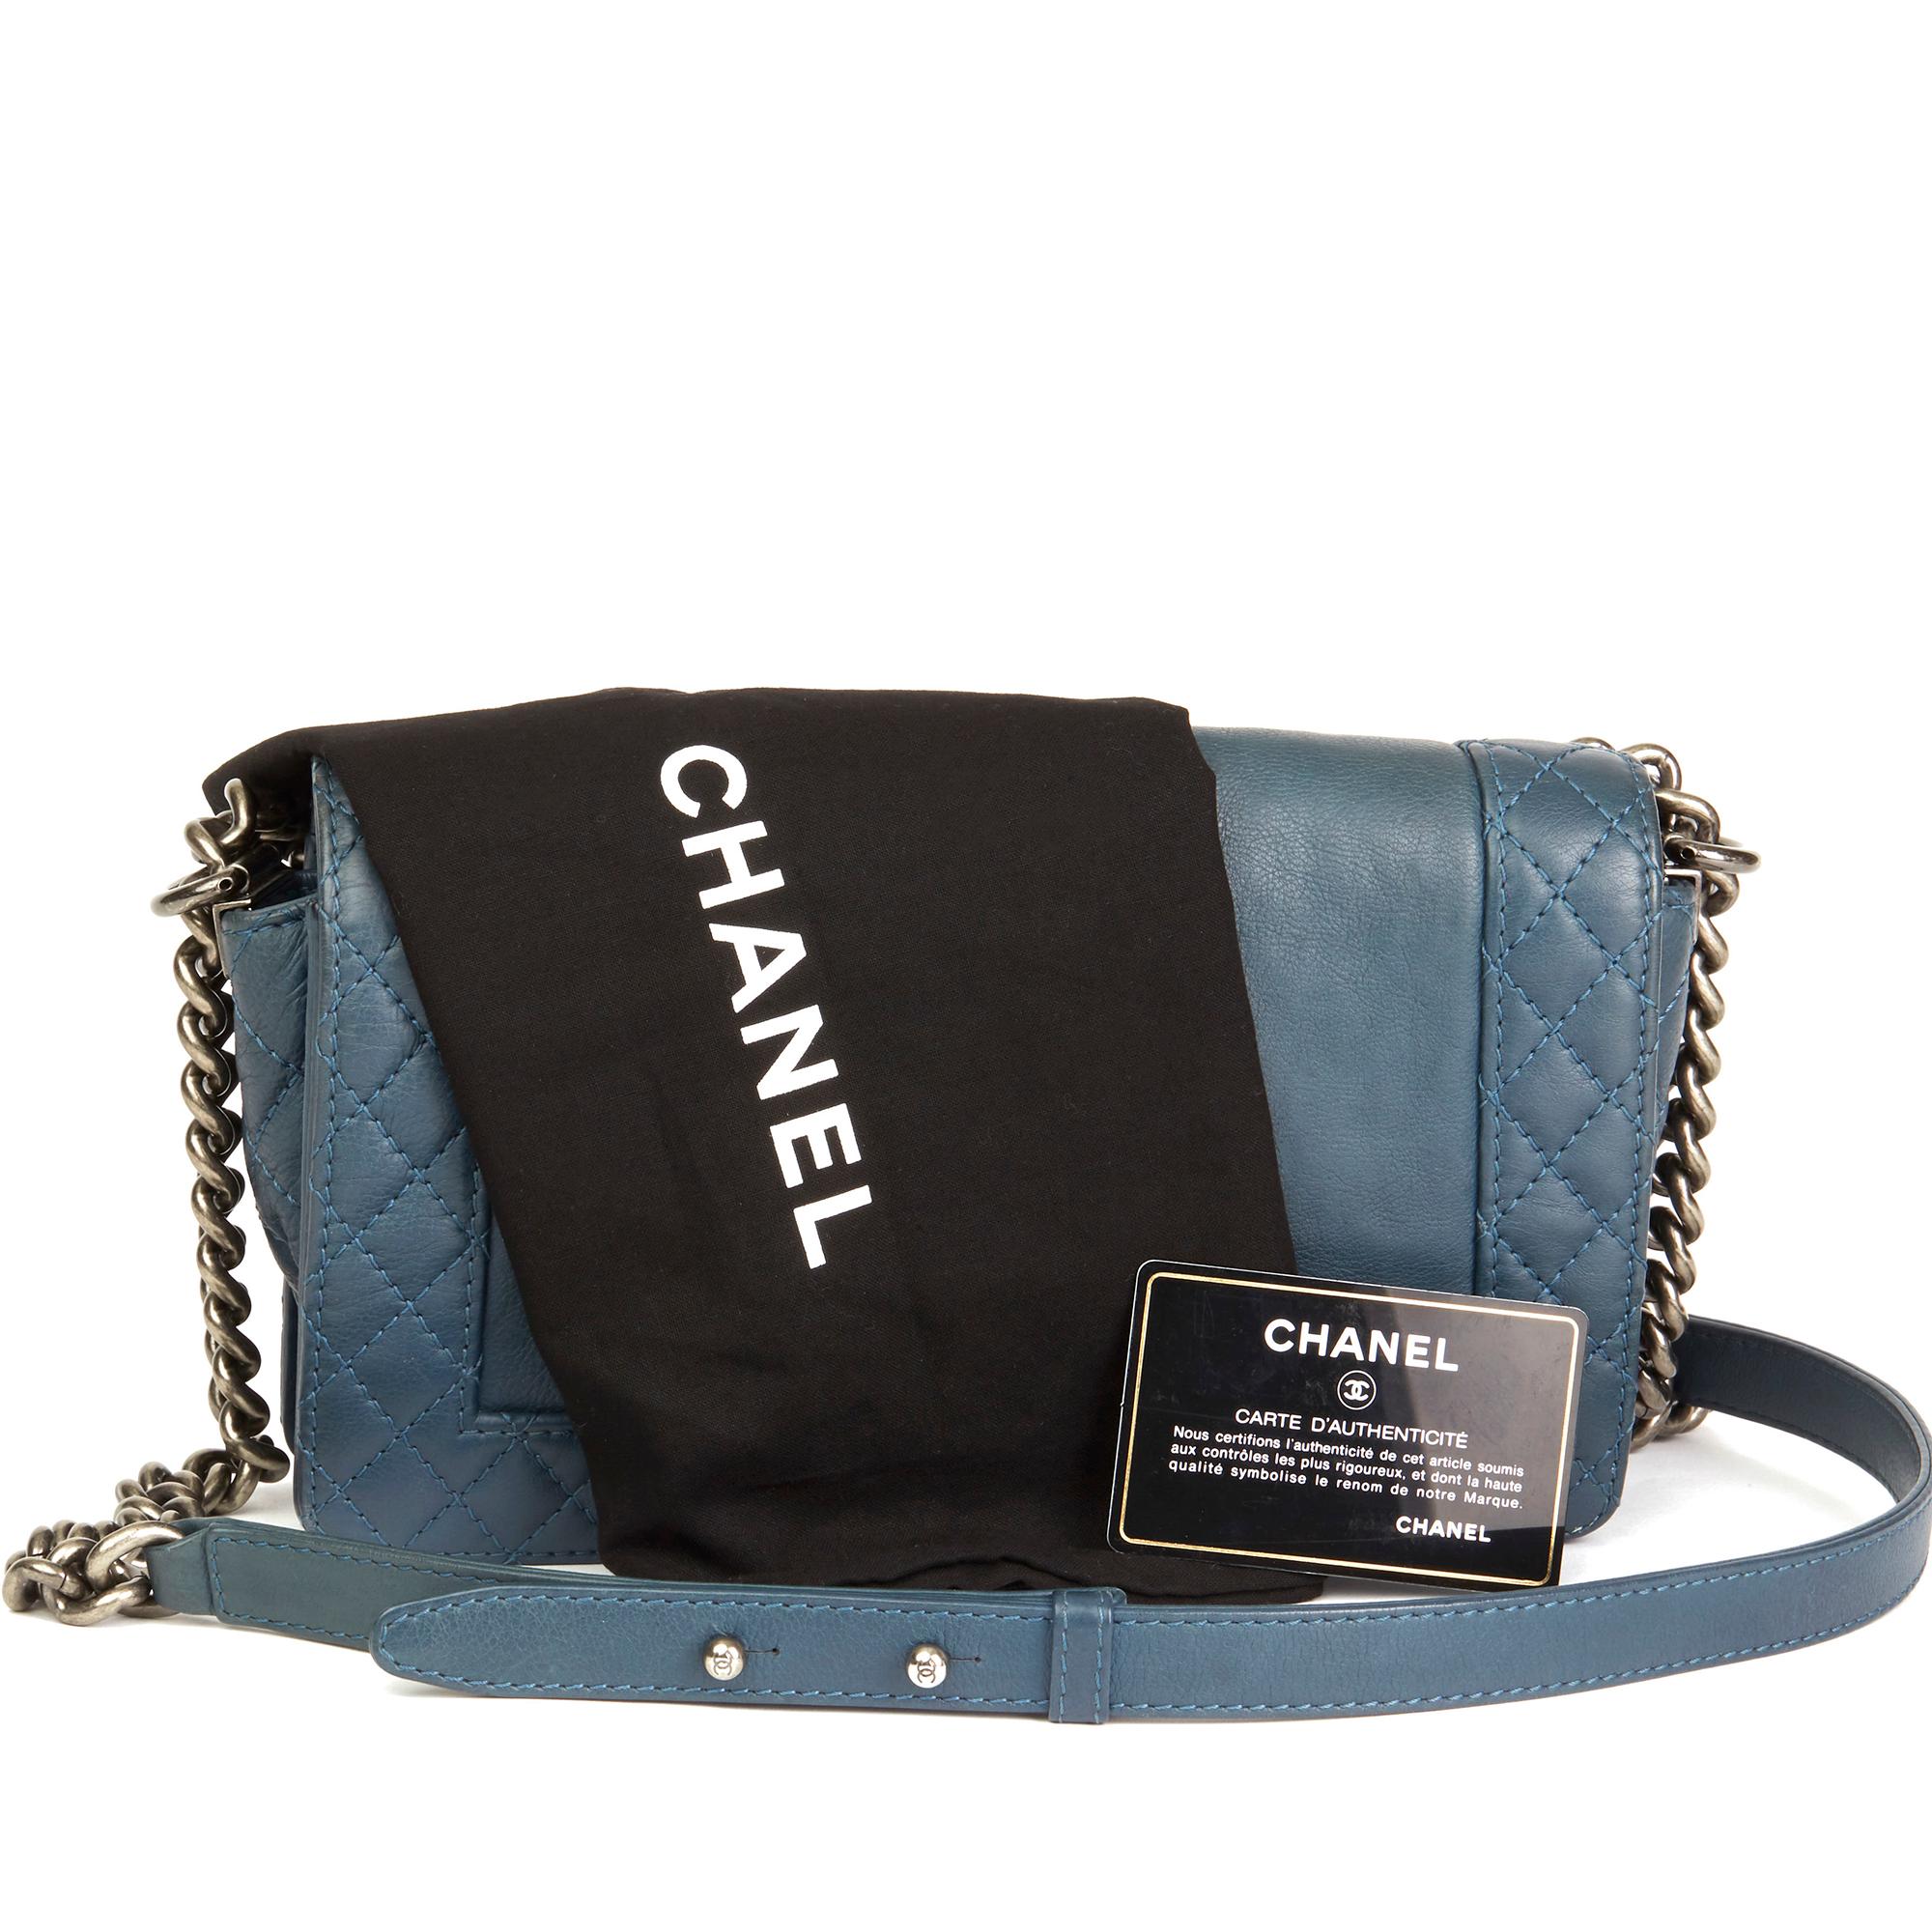 2014 Chanel Teal Quilted Calfskin Leather Medium Le Boy Reverso 6